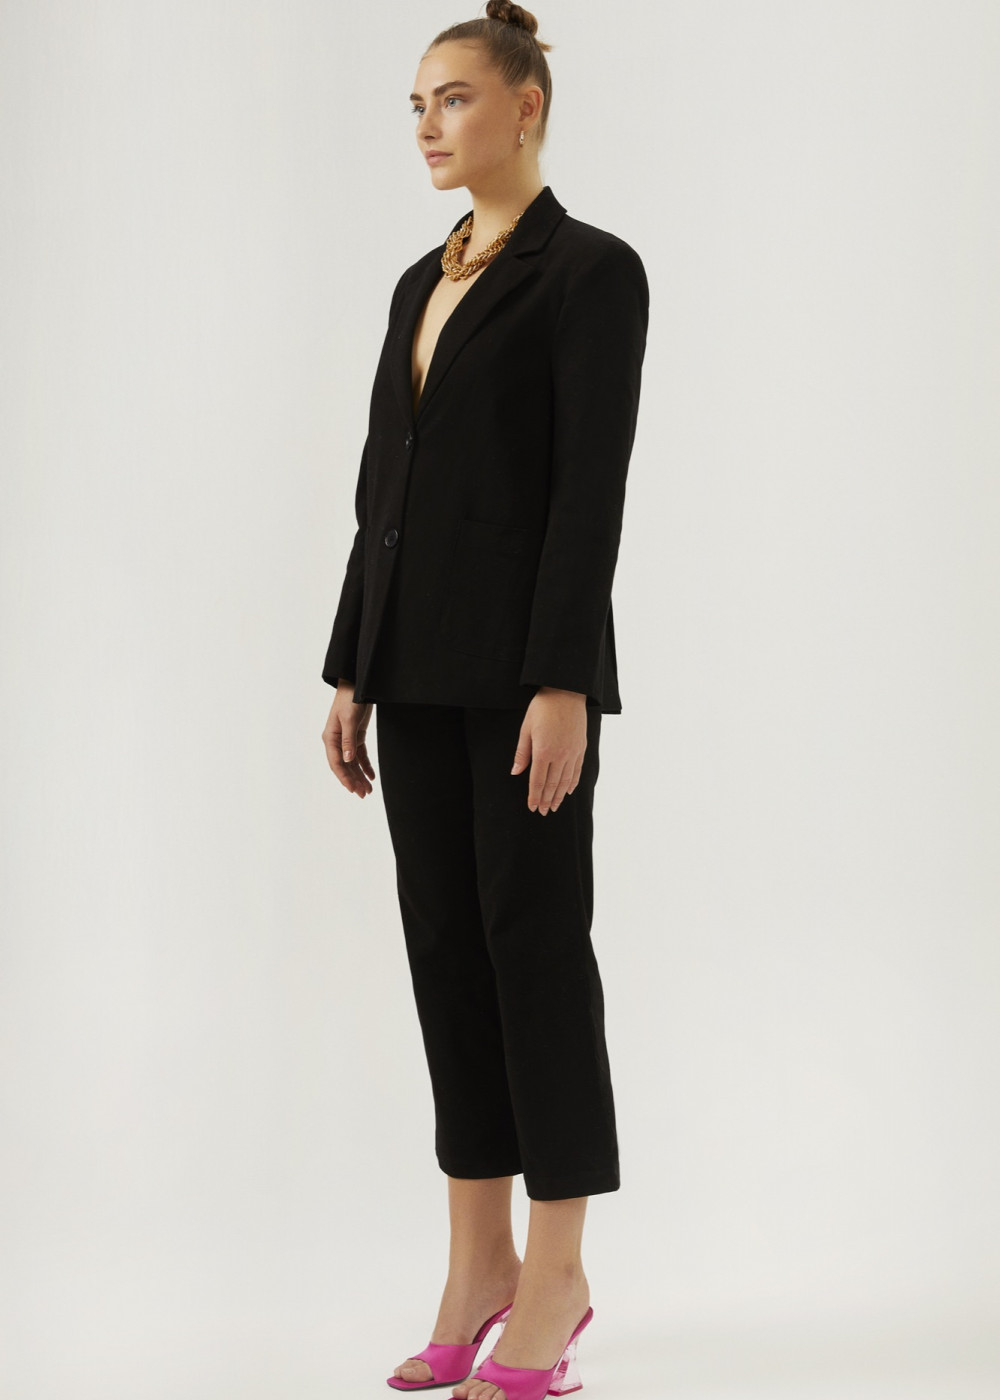 Pocket Detailed Blazer Jacket. And Button Trousers